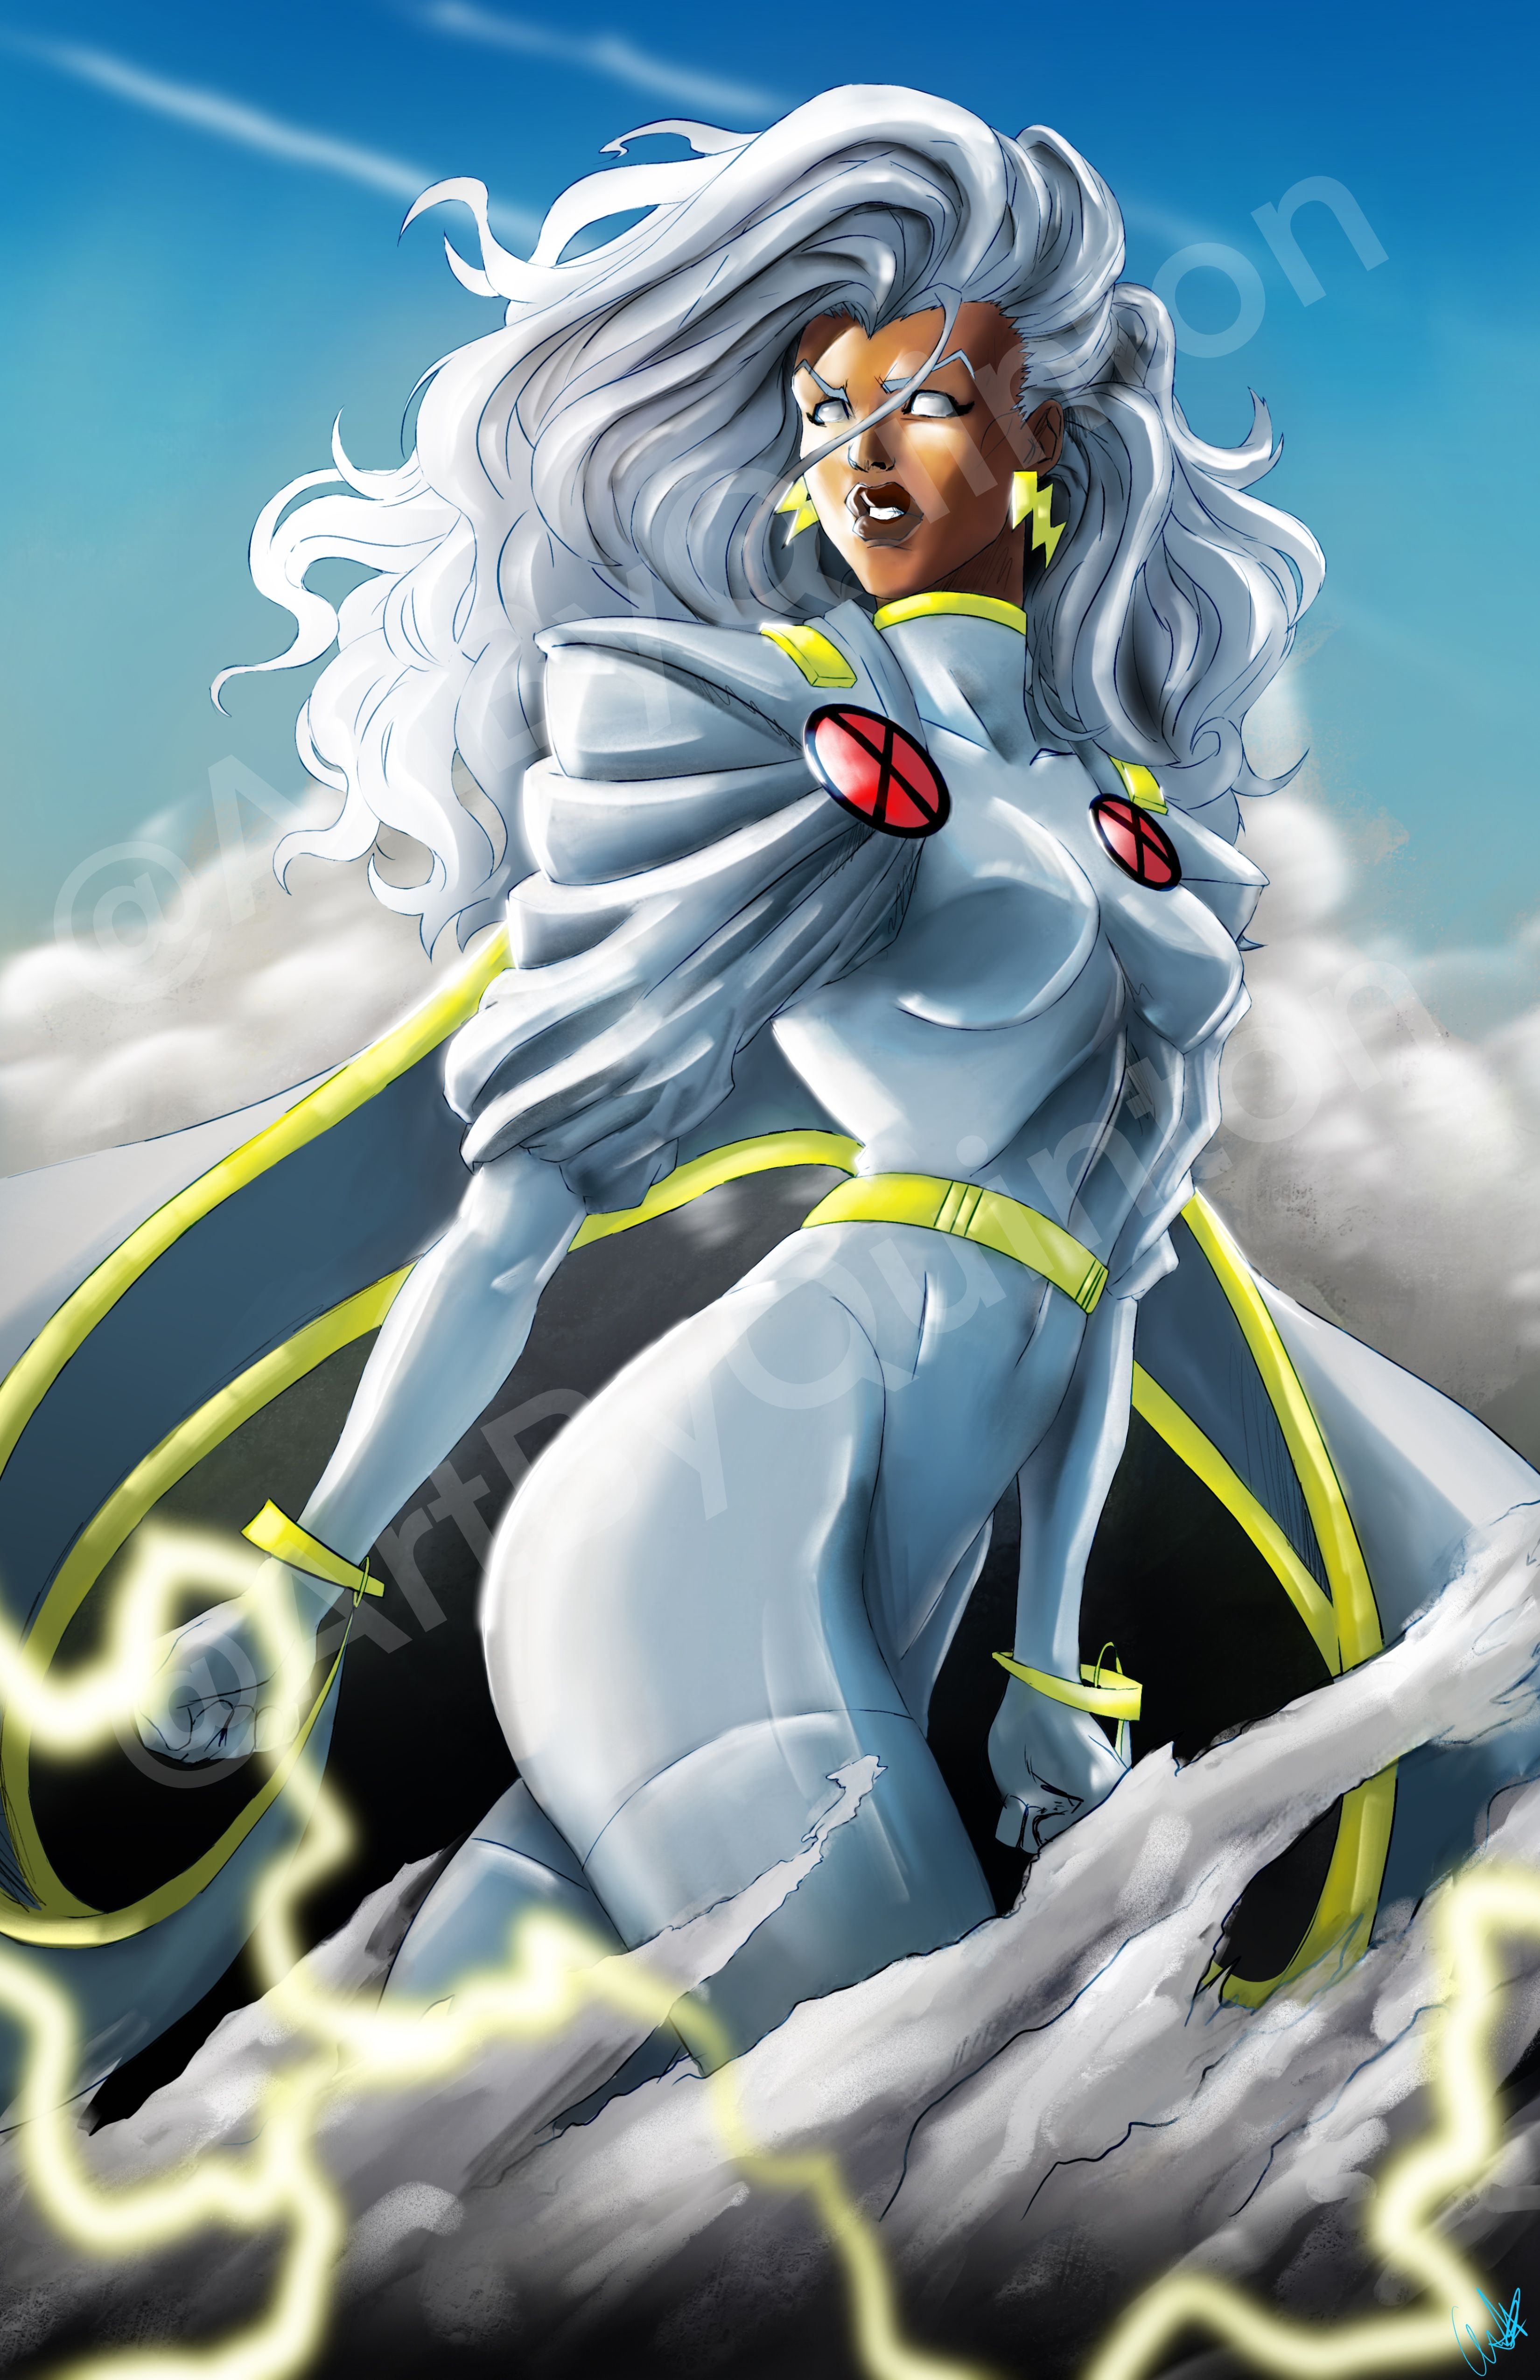 becky rebuck add photo pictures of storm from xmen